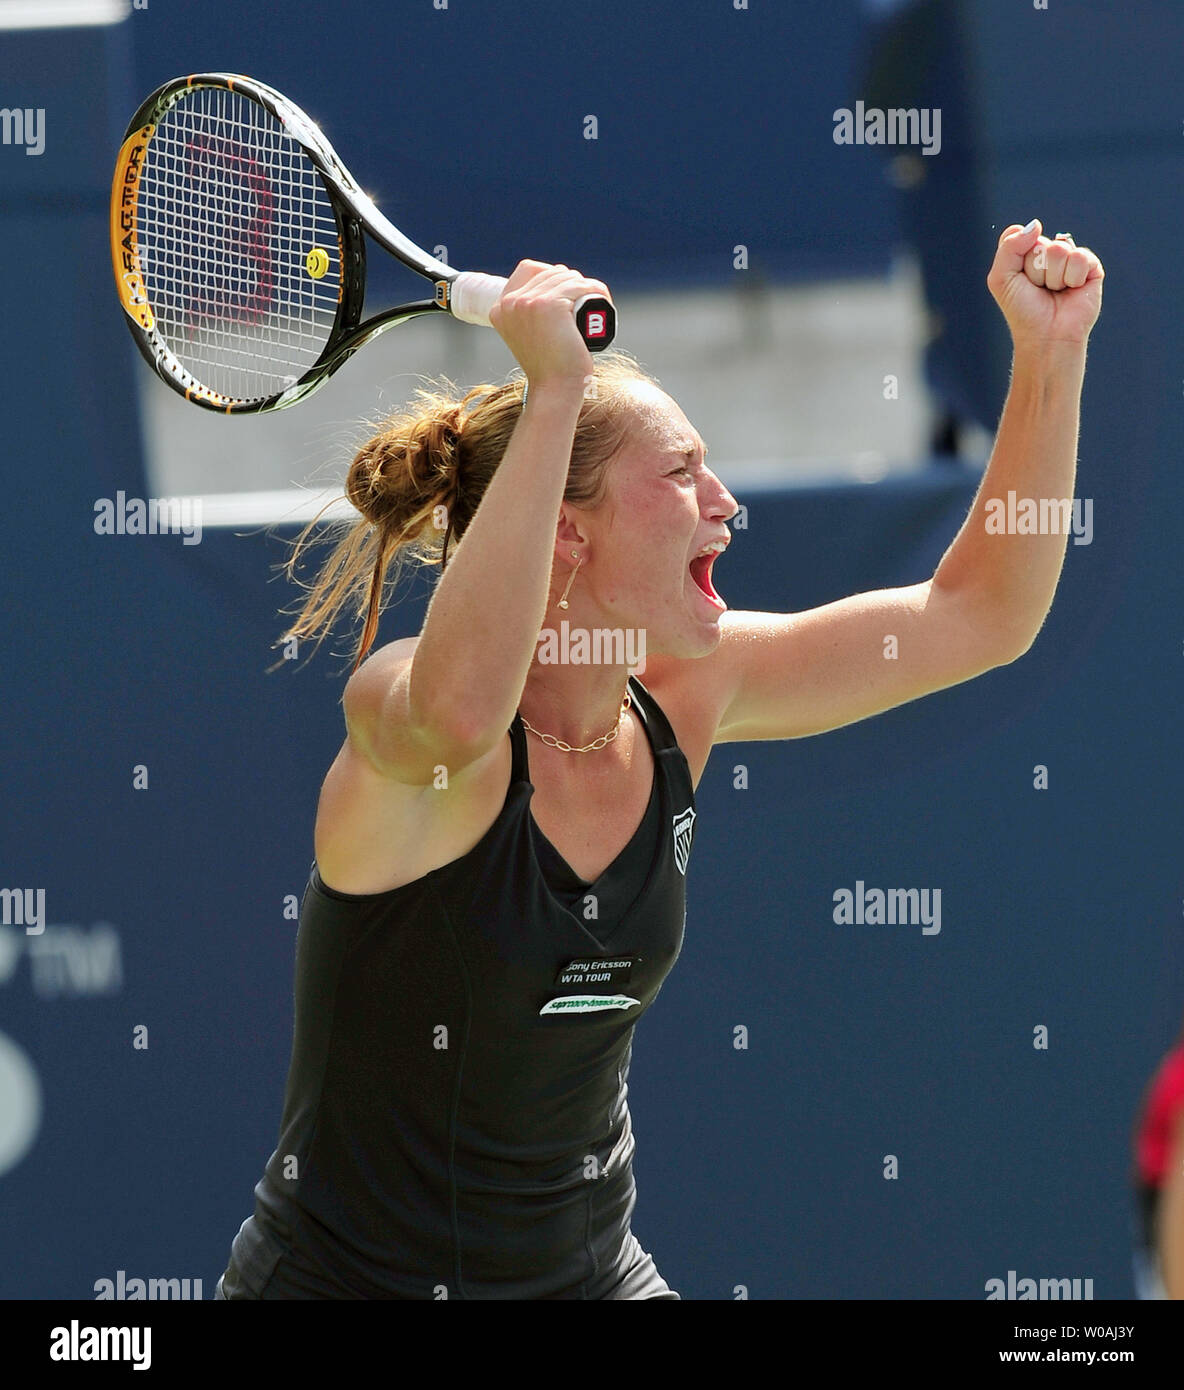 Kateryna Bondarenko of the Ukraine celebrates after defeating third seed Venus Williams 1-6, 7-5, 6-4 during the second day of Rogers Cup singles action at the Rexall Center in Toronto, Canada on August 18, 2009.   UPI /Christine Chew Stock Photo